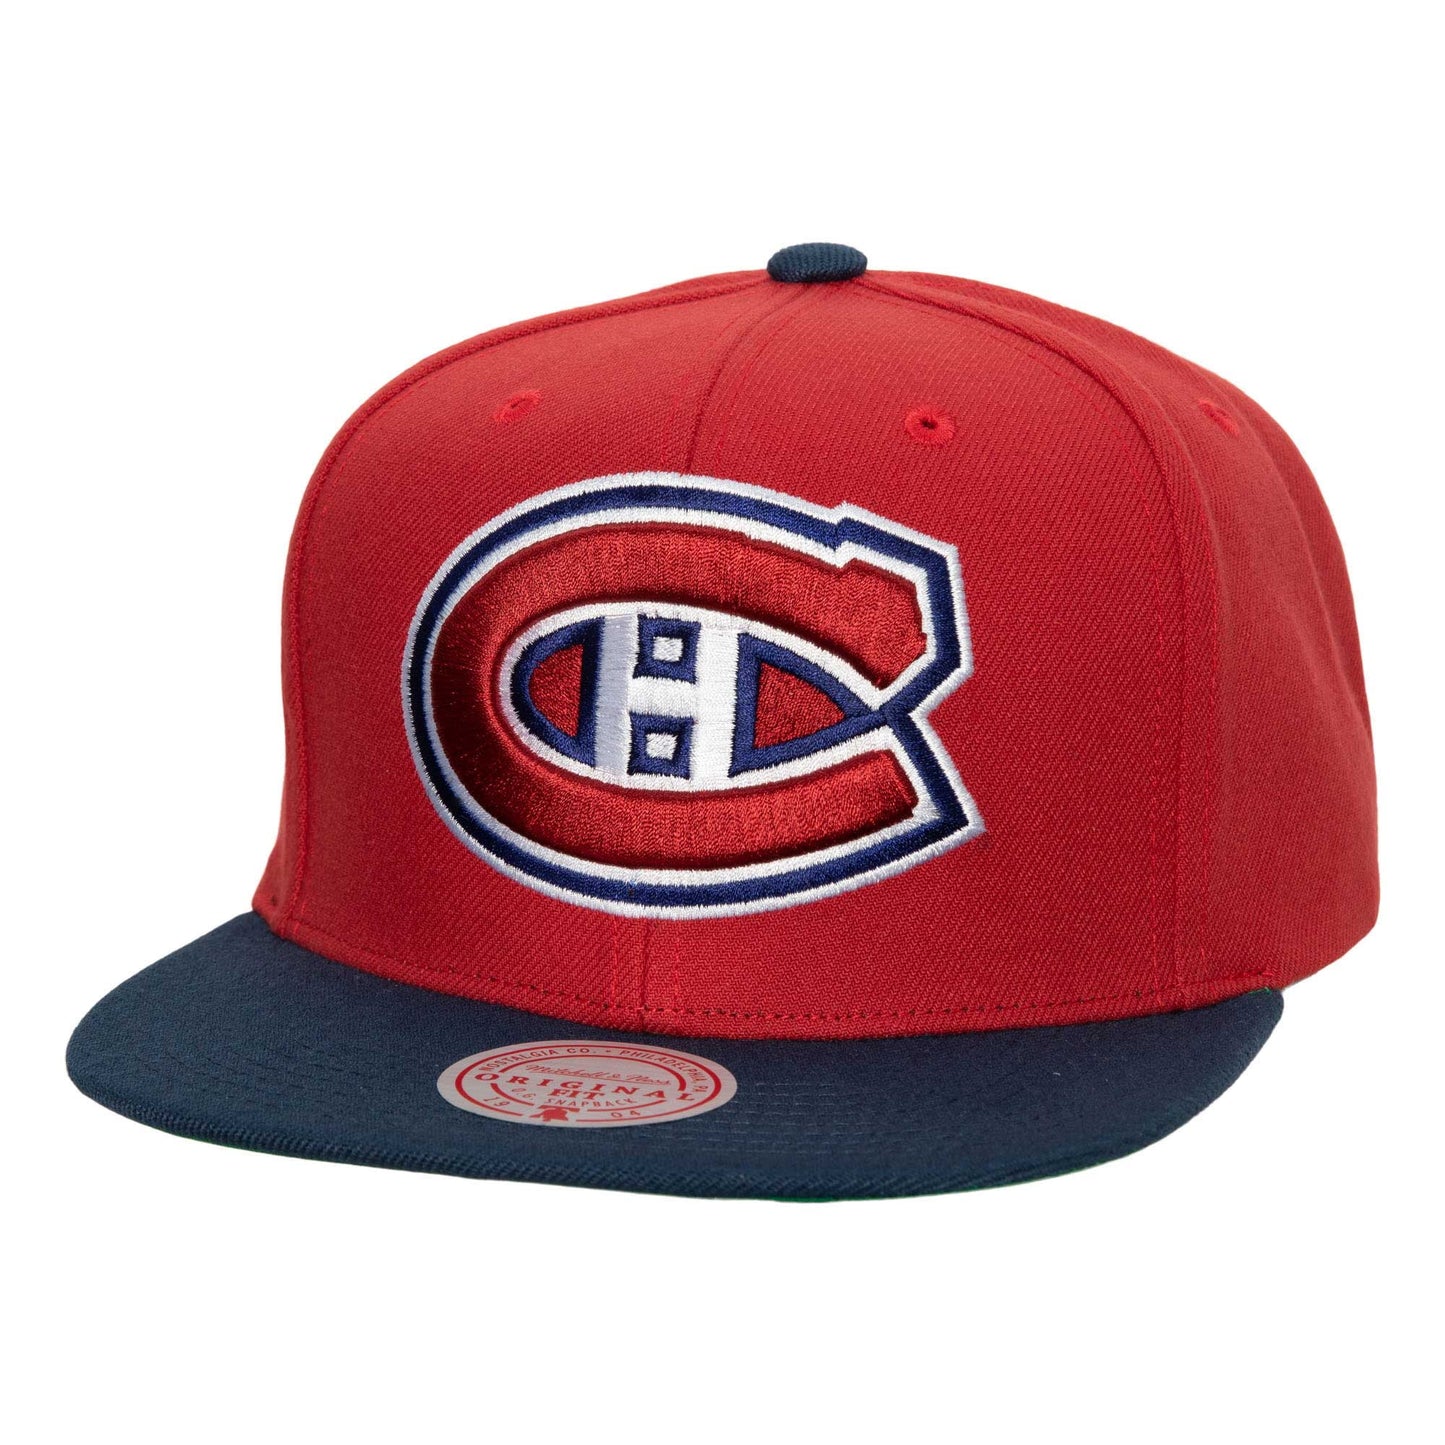 Men's Mitchell & Ness Red Montreal Canadiens Core Team Ground 2.0 Snapback Hat - OSFA